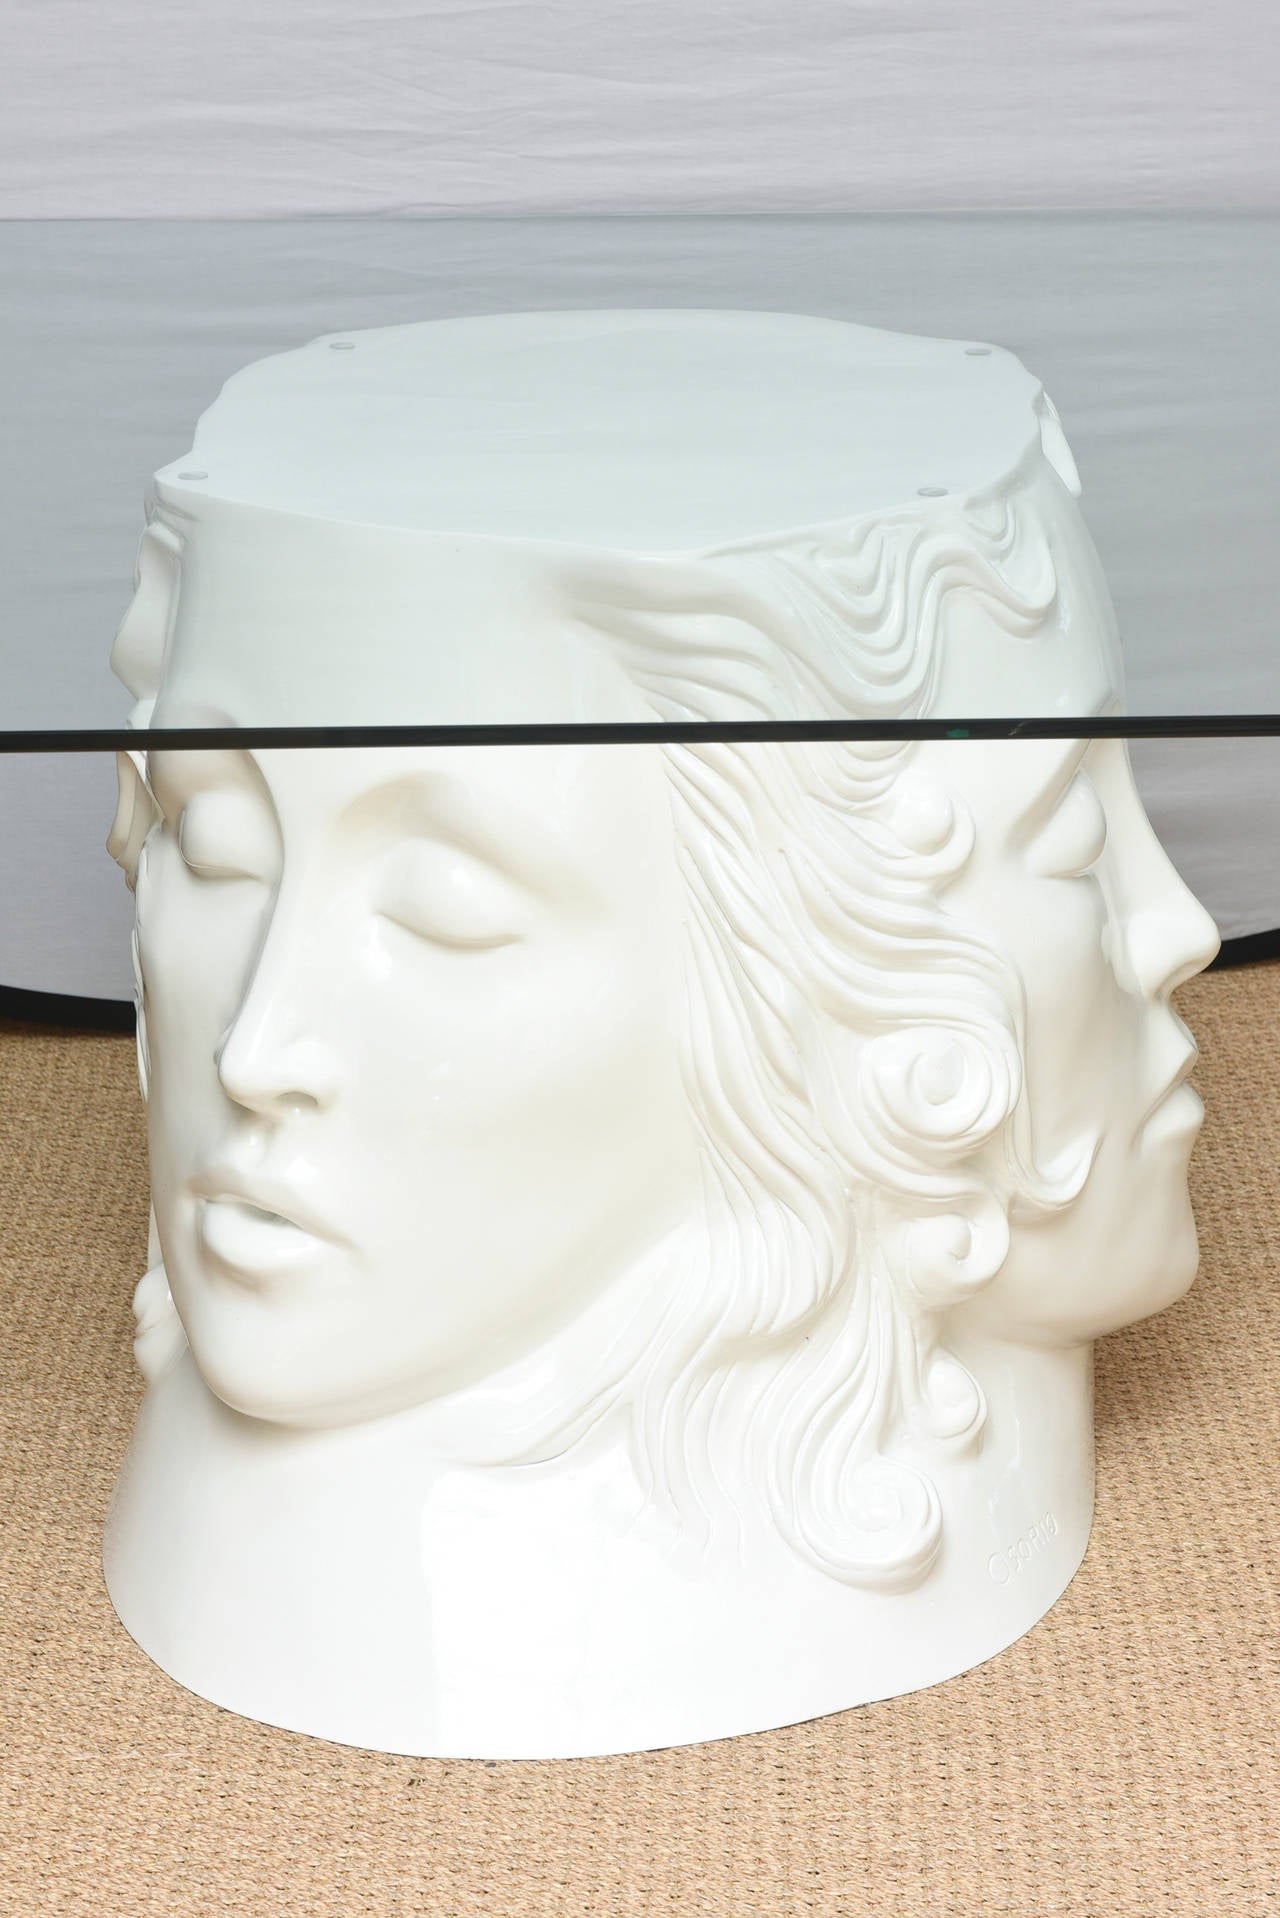 The three serene closed eyed female faces hold court on three sides which are met with the fourth side of tendrils of cascading molded hair. This is art, sculpture, theater and drama all in one as this amazing dining table, desk or entry table. It